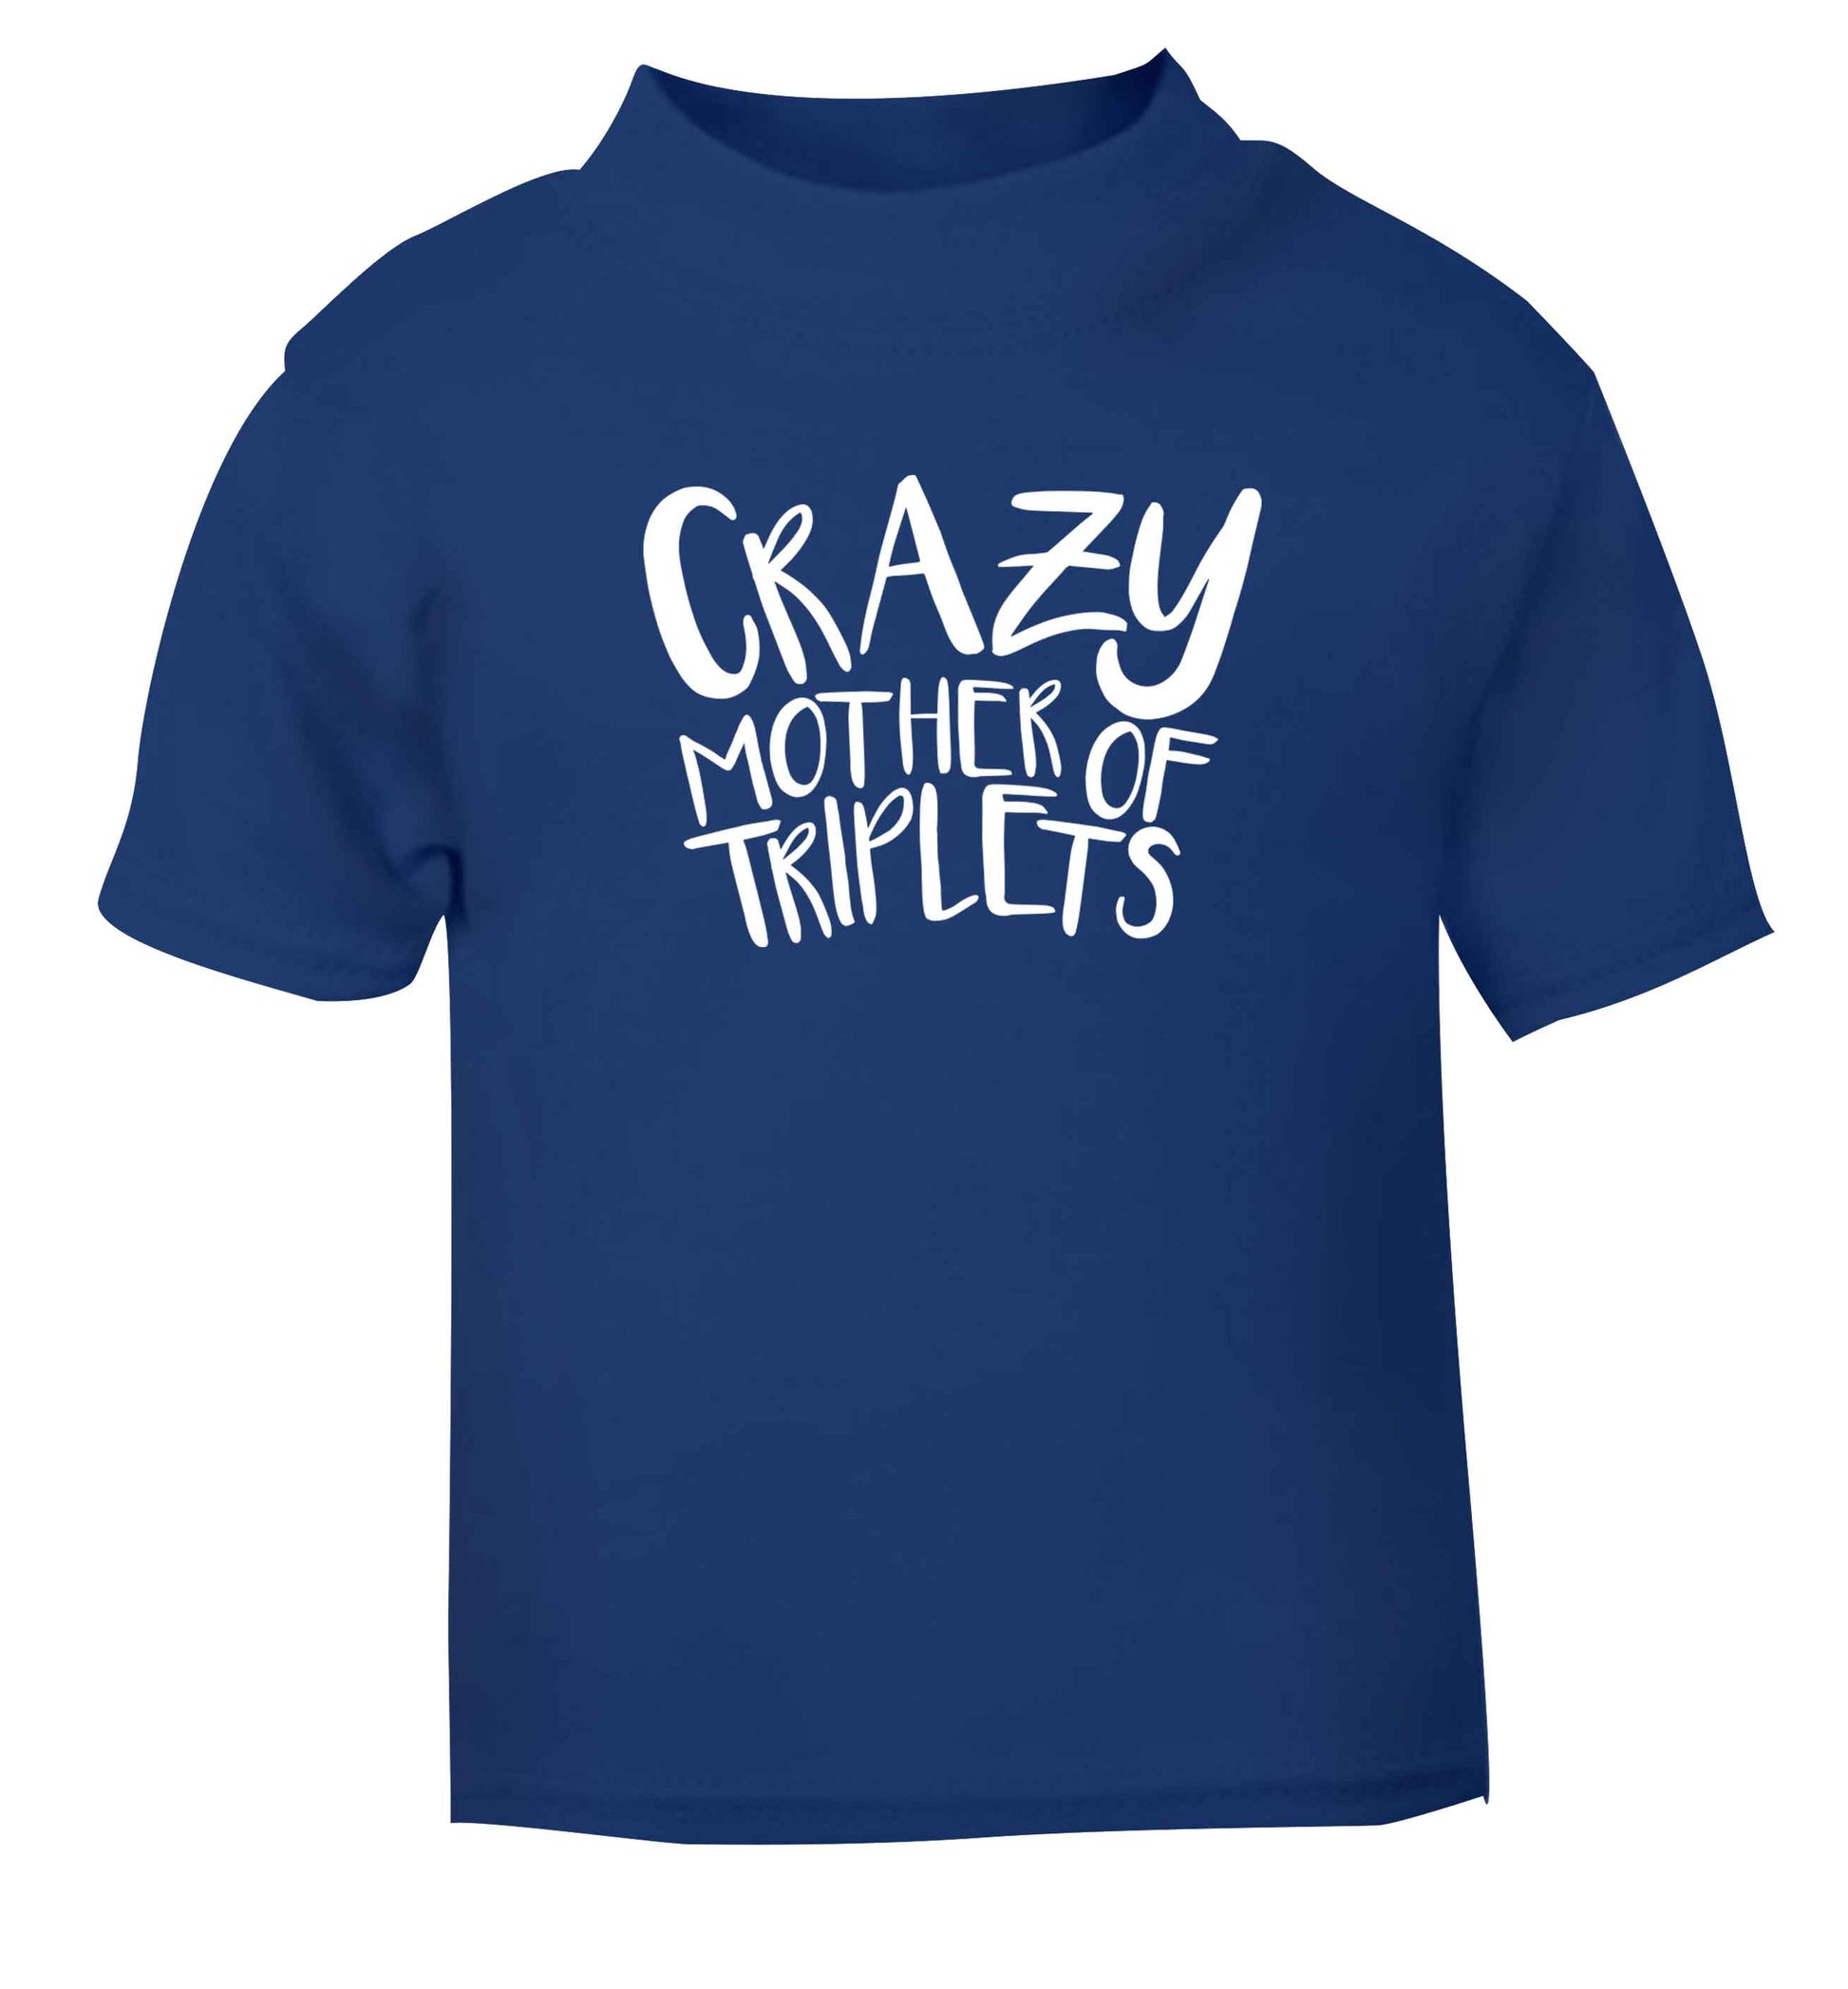 Crazy mother of triplets blue baby toddler Tshirt 2 Years